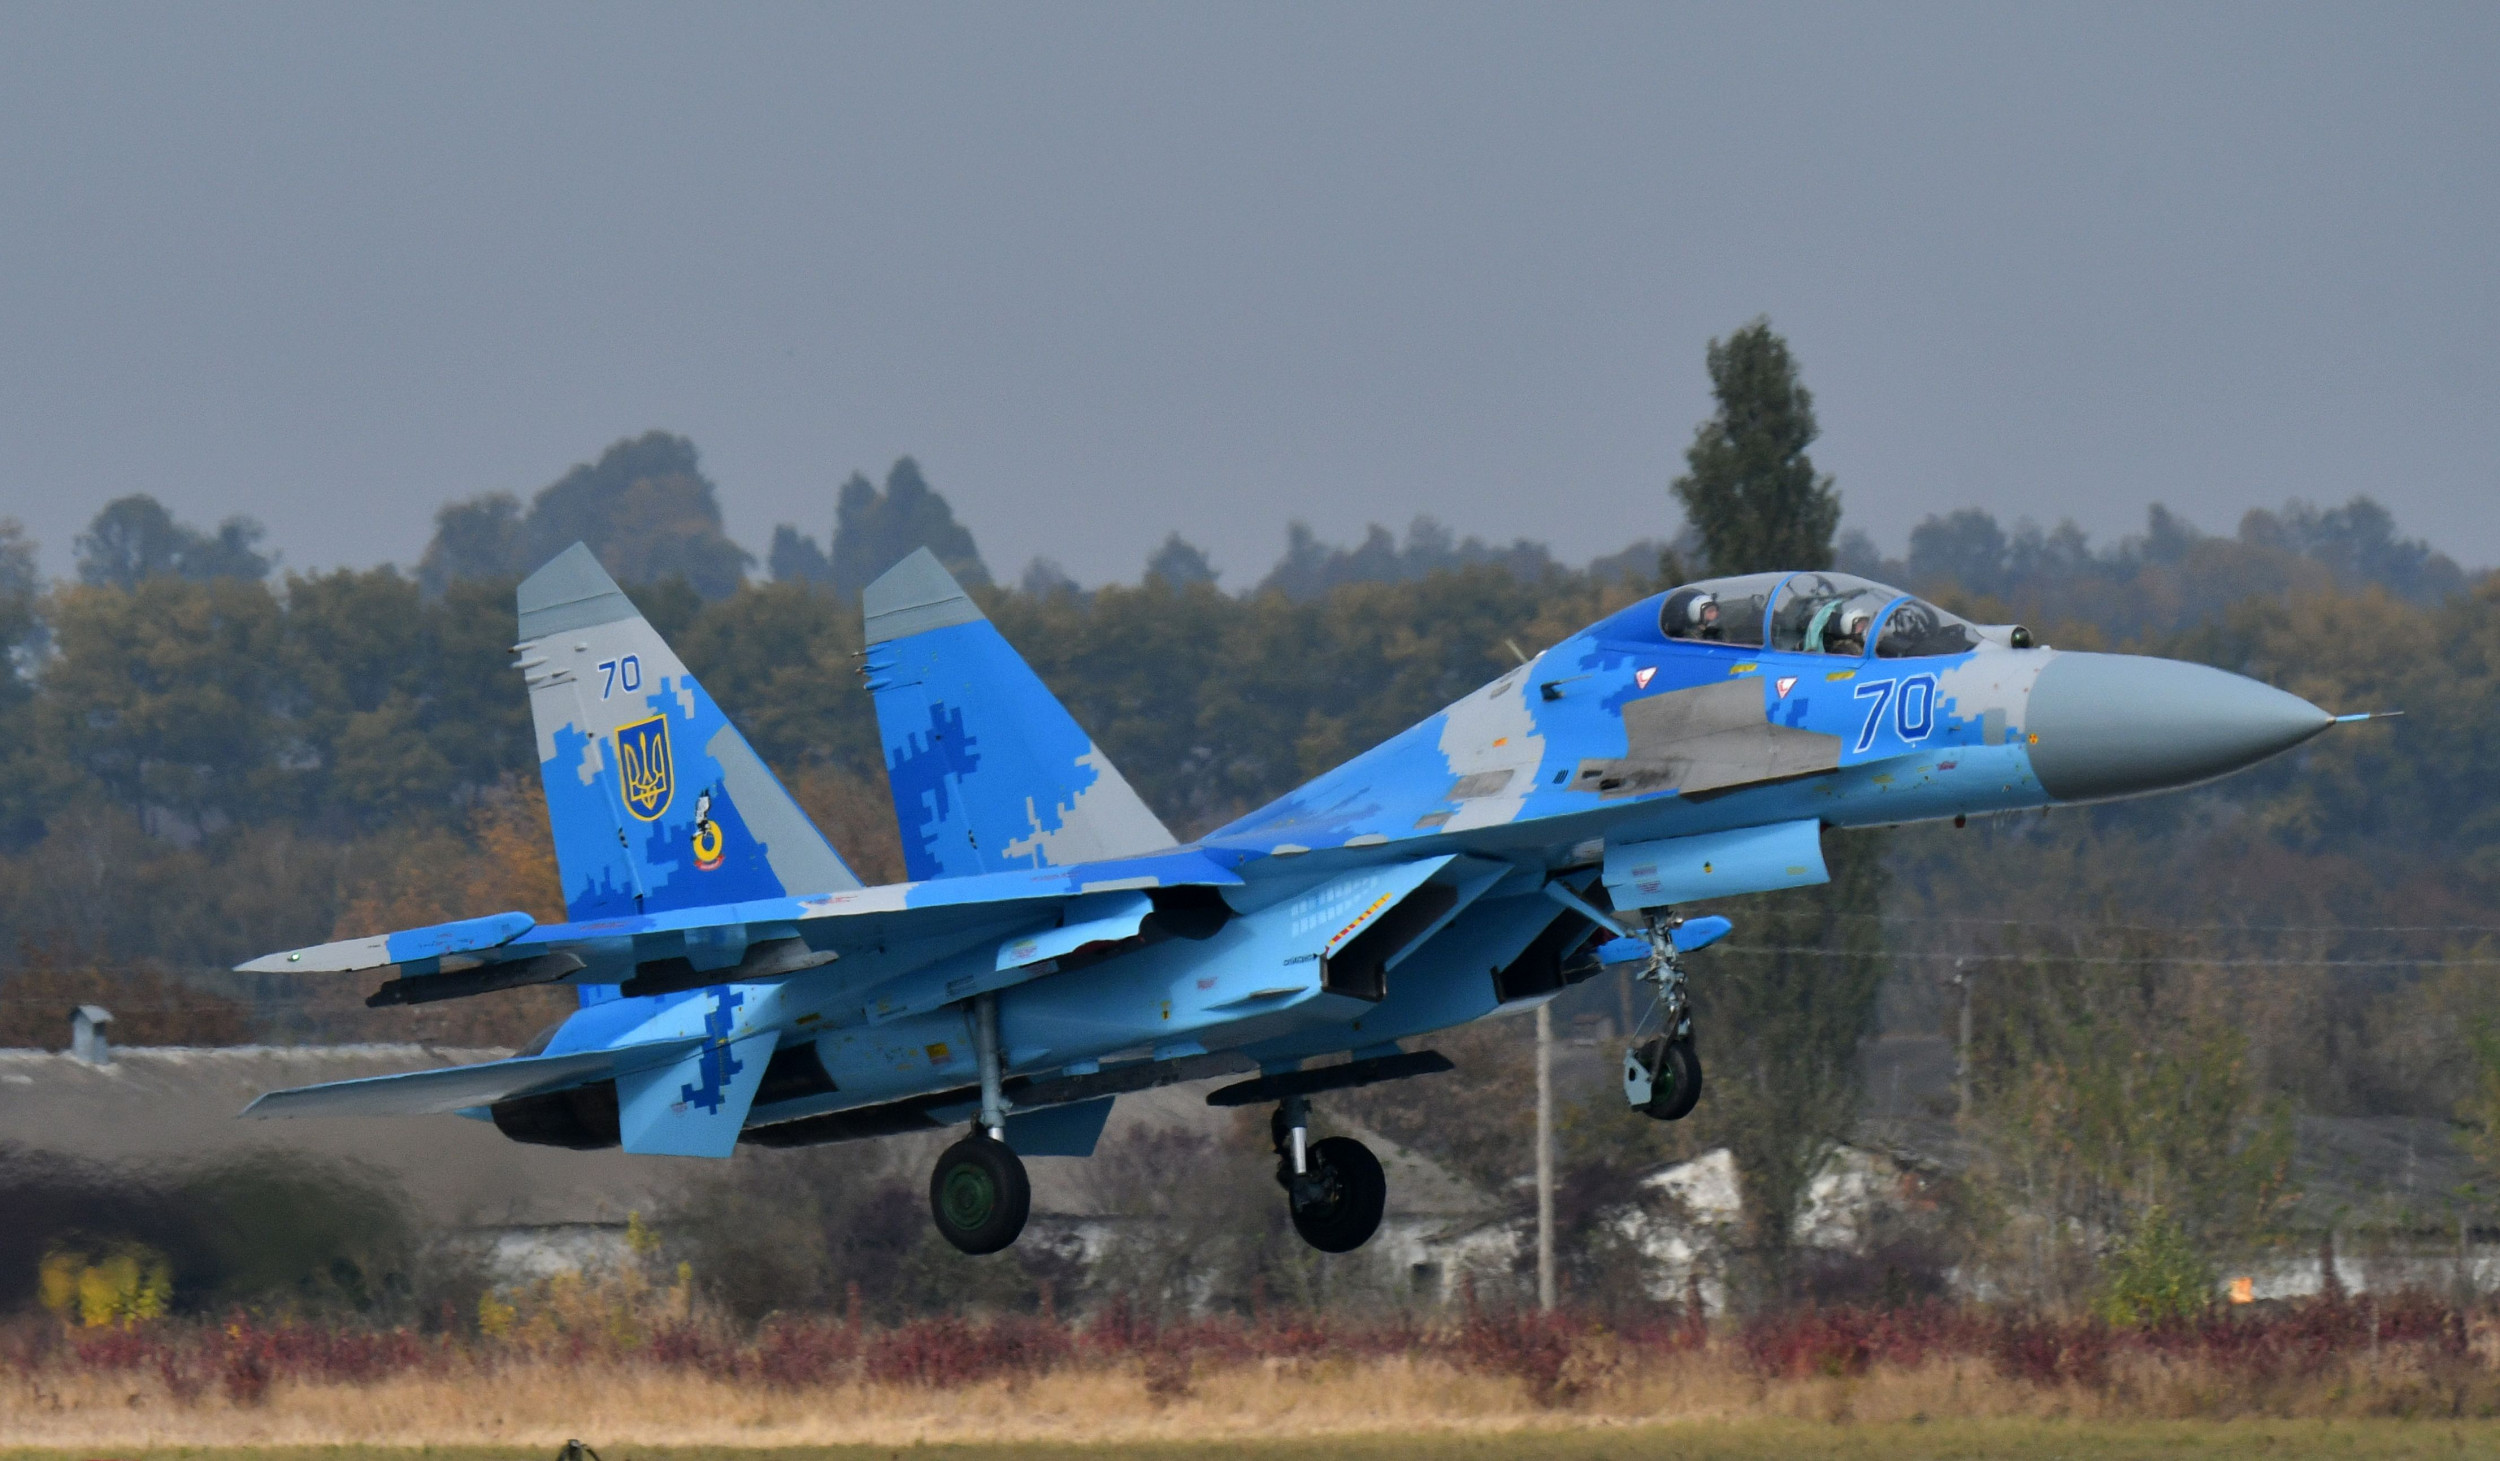 Ukraine's 30-Year-Old Fighter Jets Hand Russia The Air Advantage In Any War